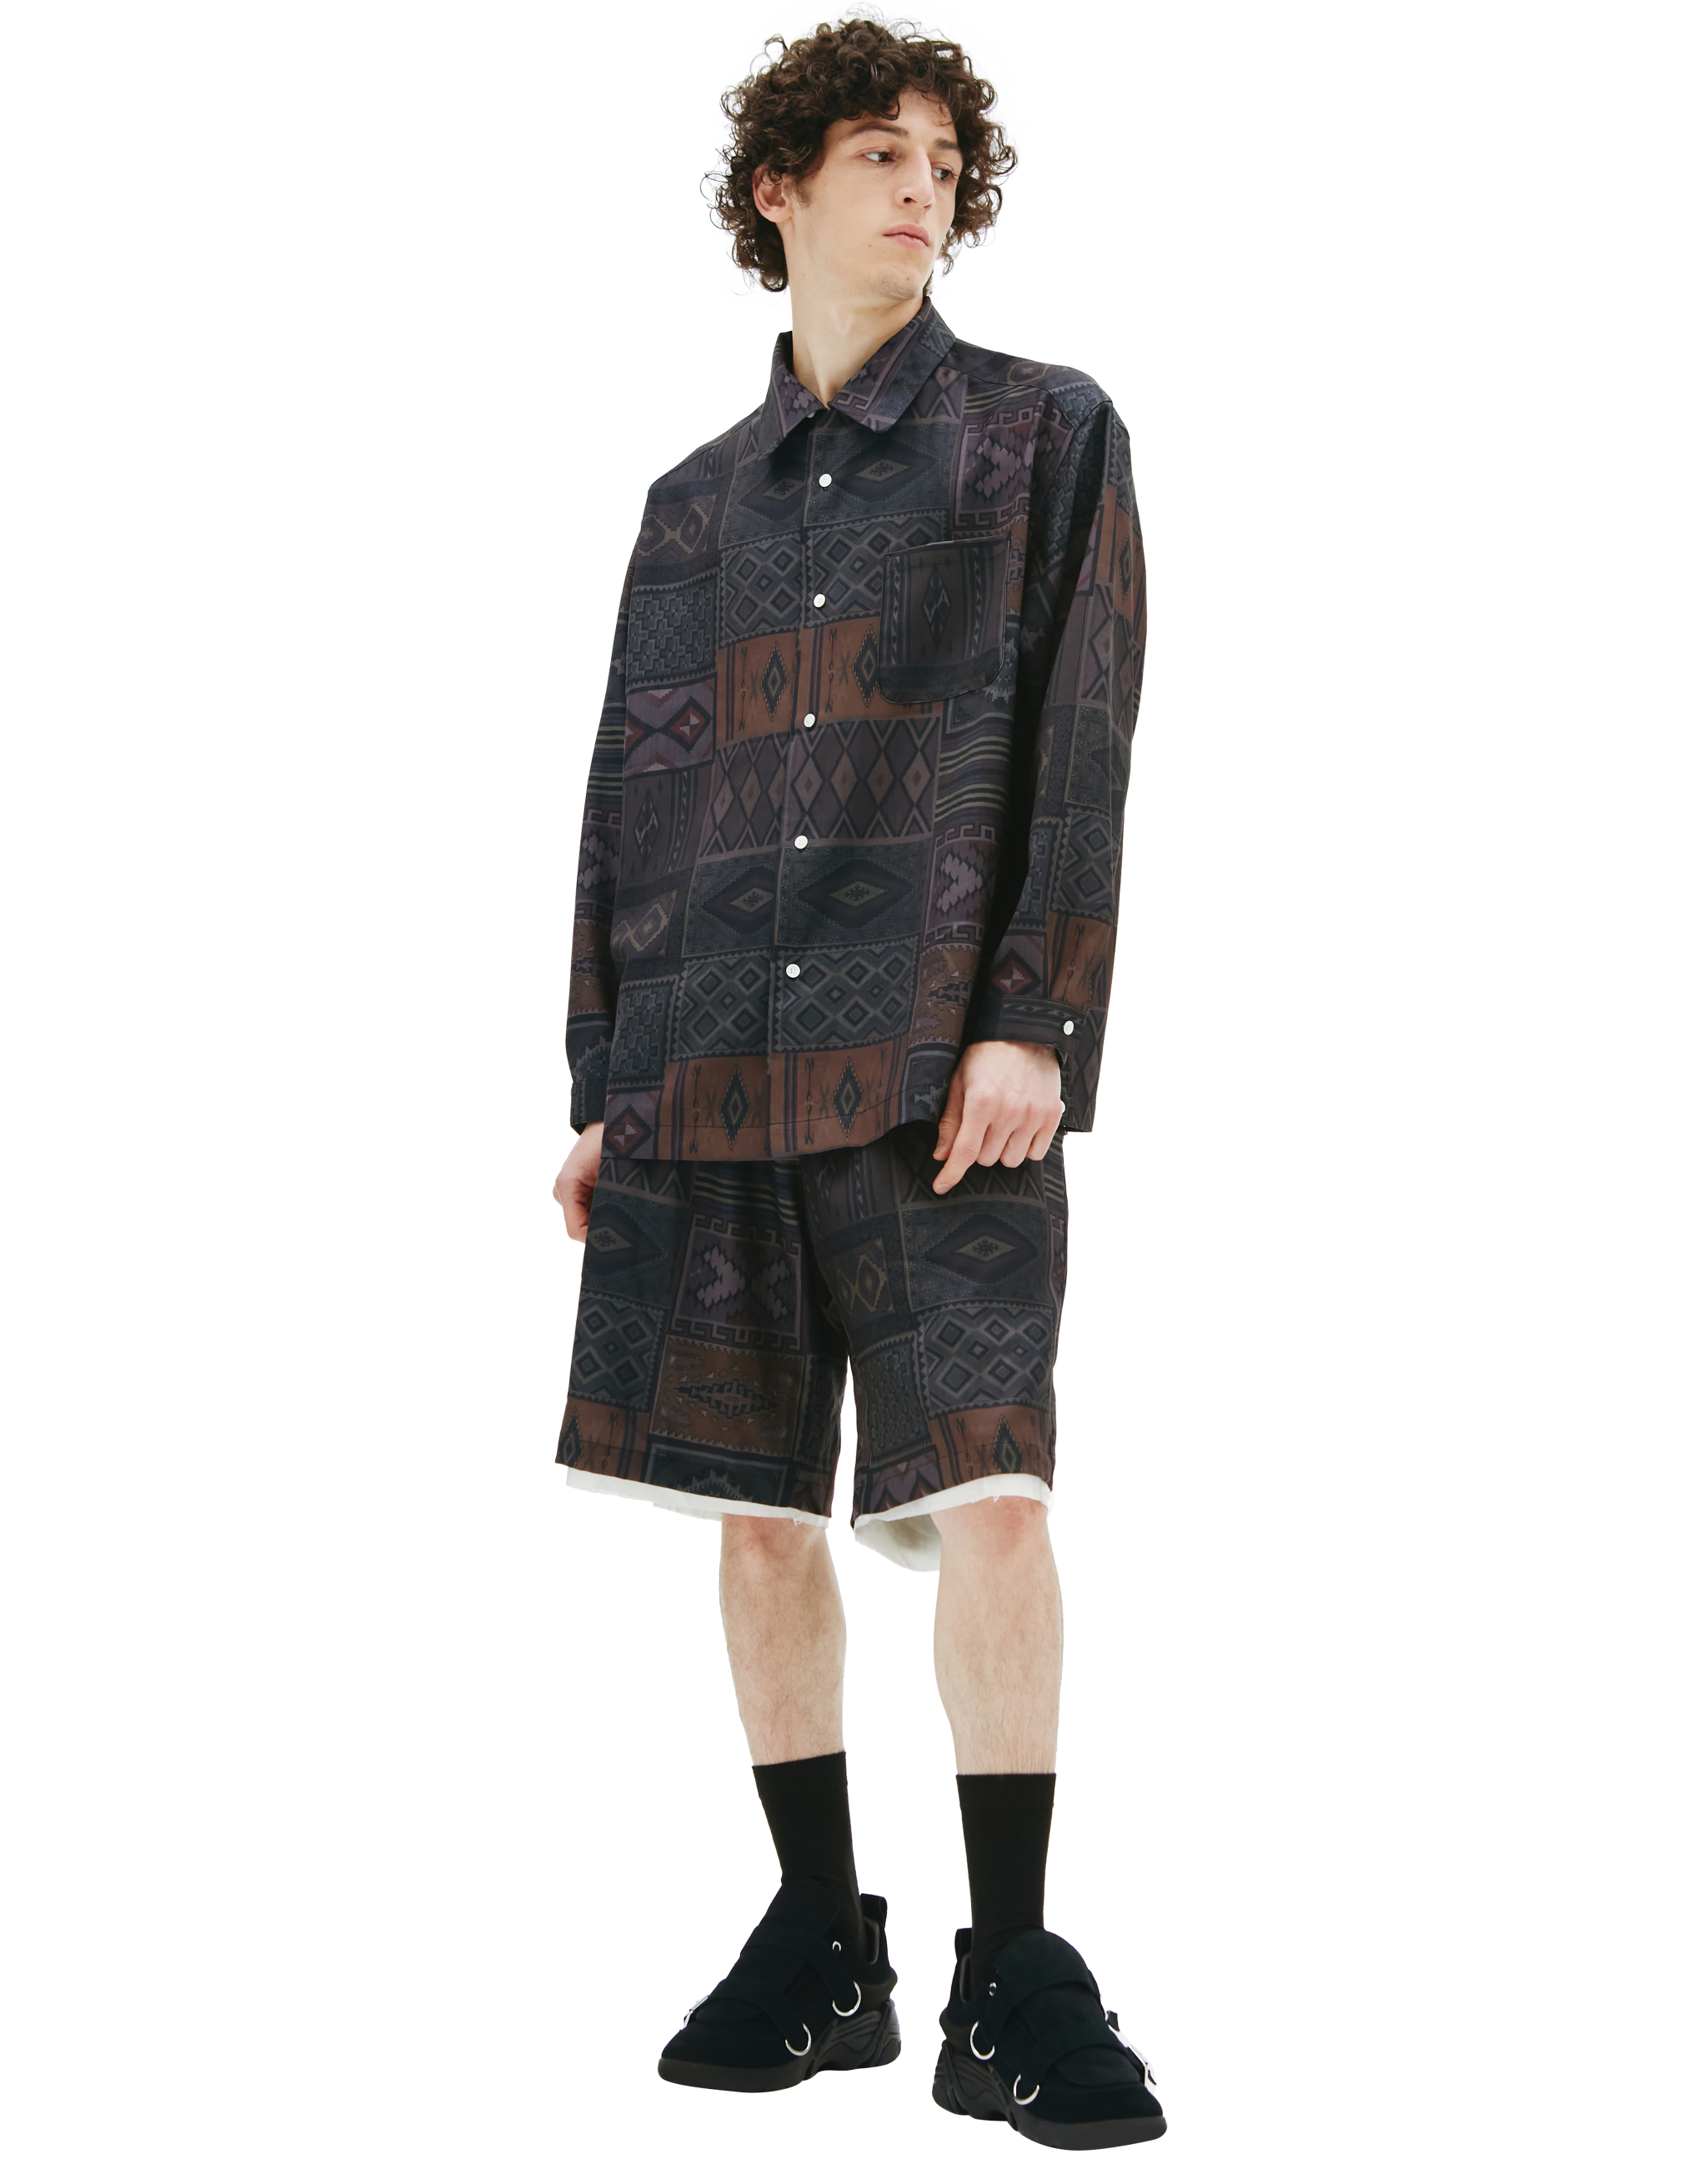 Children Of The Discordance Personal Data Print Shirt In Brown